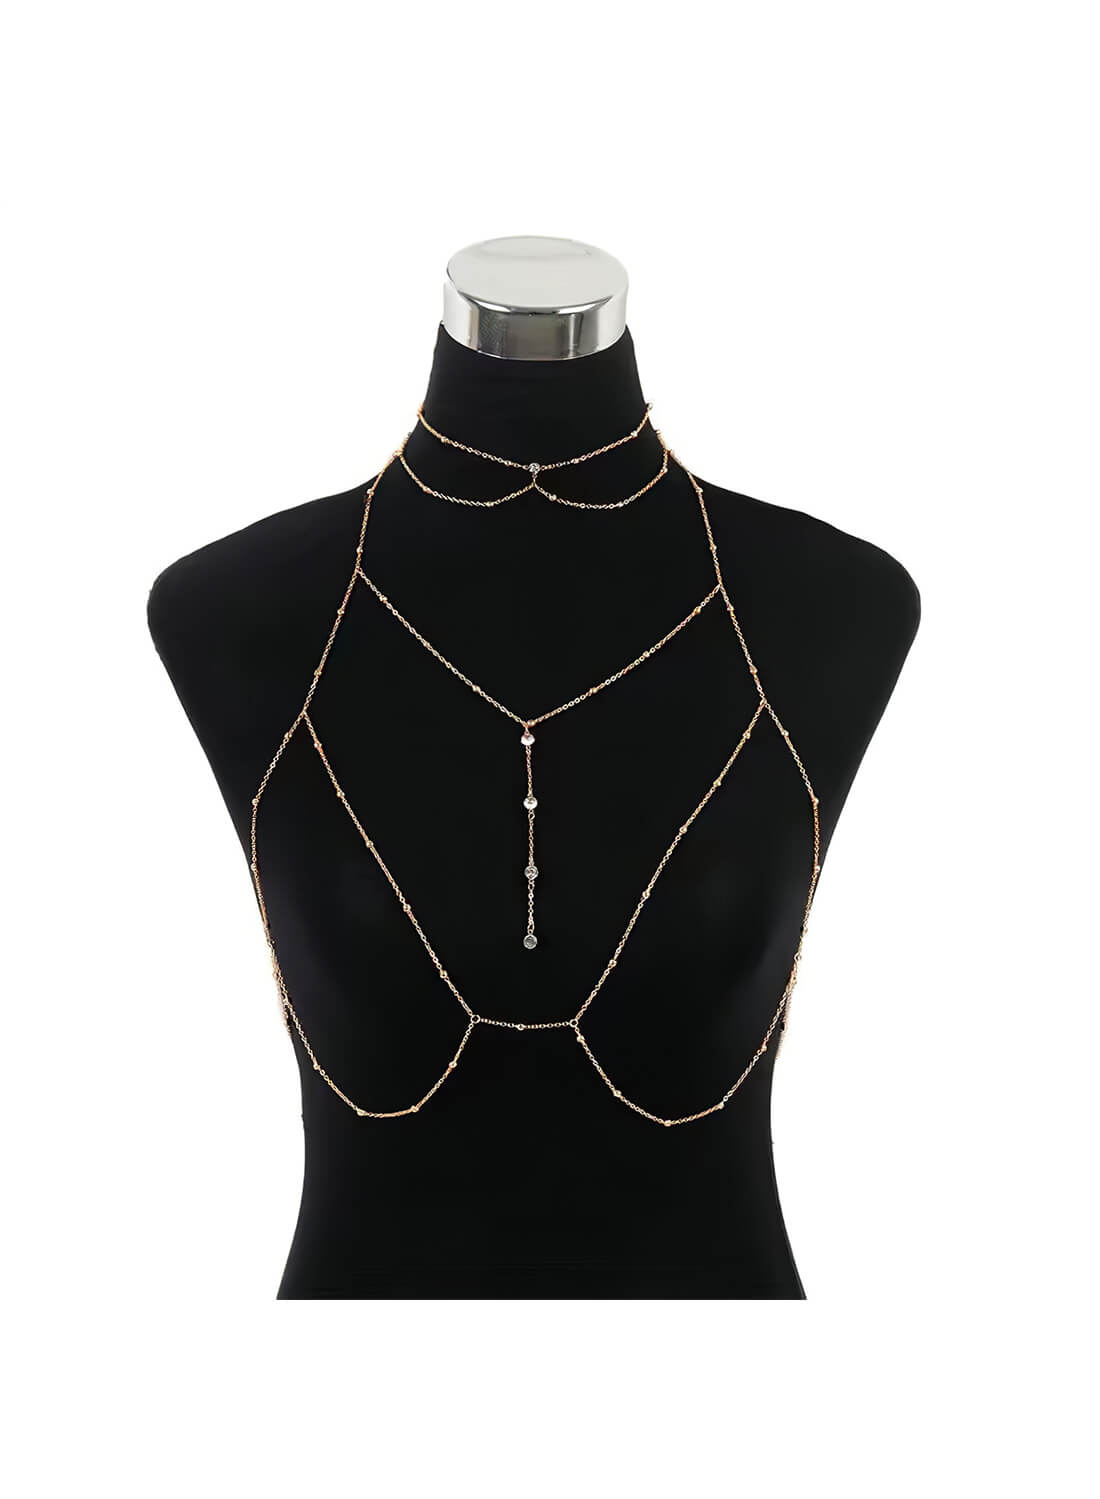 Multi Layered Body Chain with Shining Crystal and Necklace Set